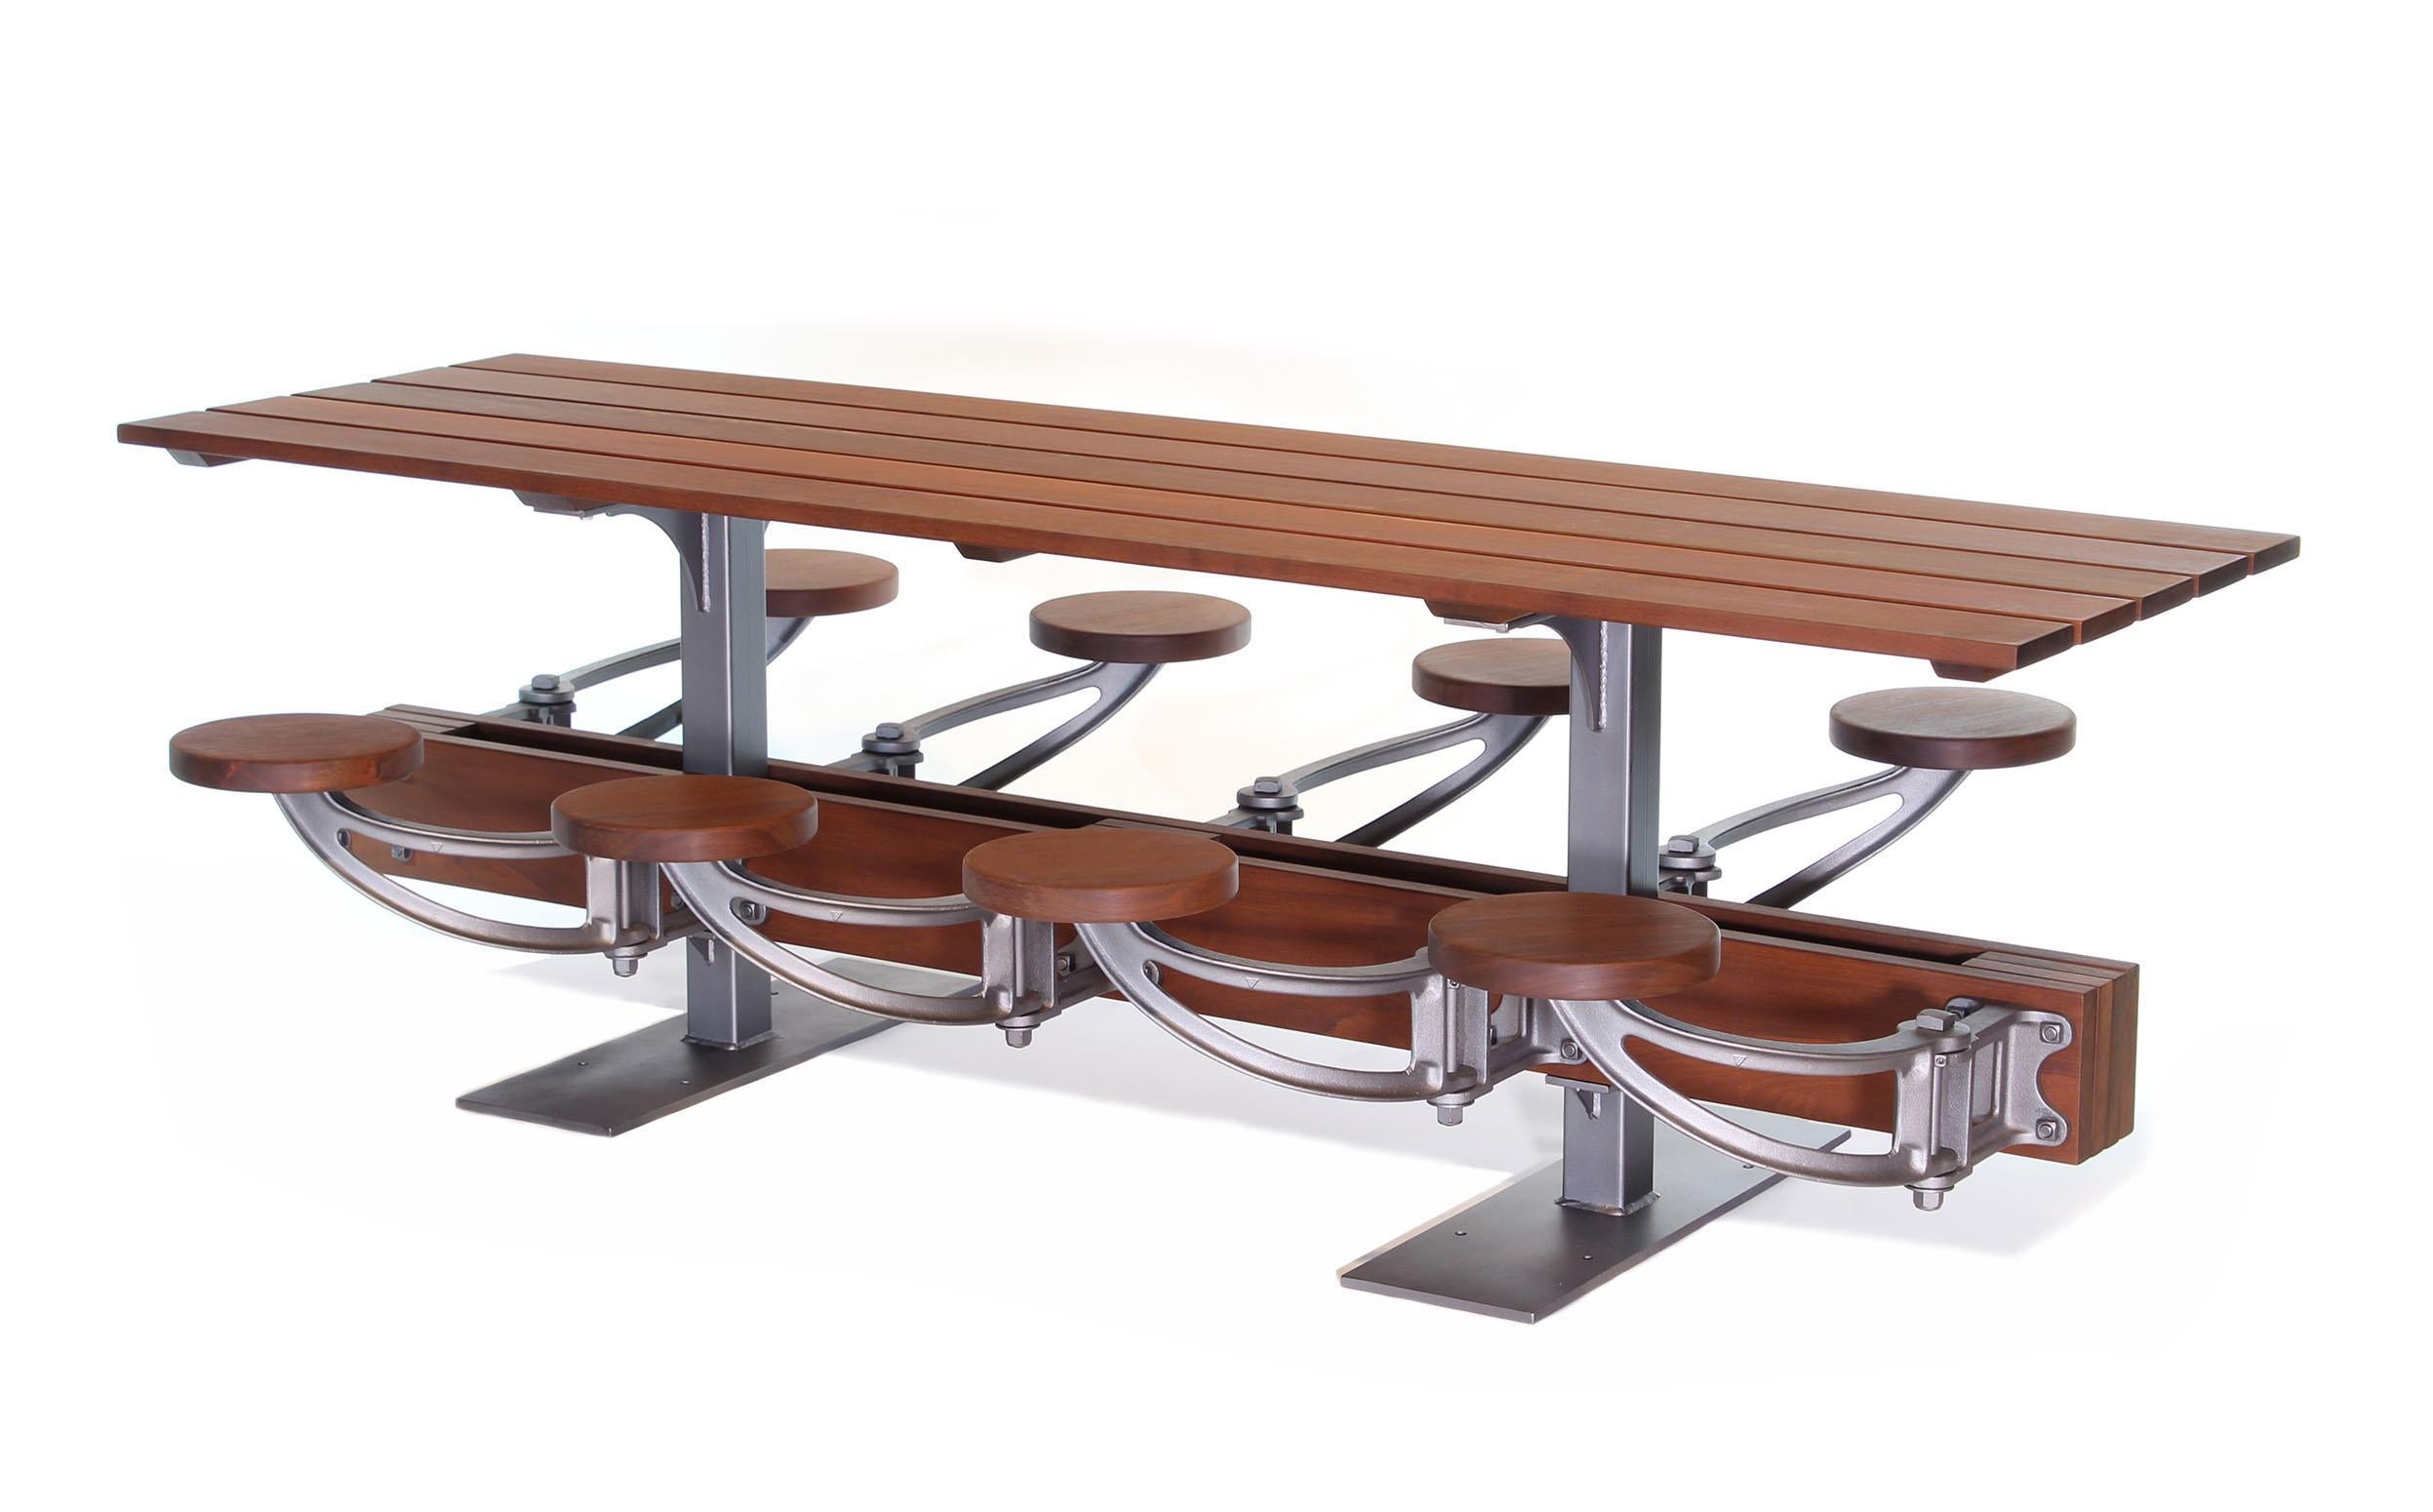 Seats and top are crafted from IPE, a walnut wood species from Brazil, three times harder than cedar and twice the density of standard pressure-treated wood. IPE can last over 75 years with proper care (yearly oiling). IPE is Eco-friendly,